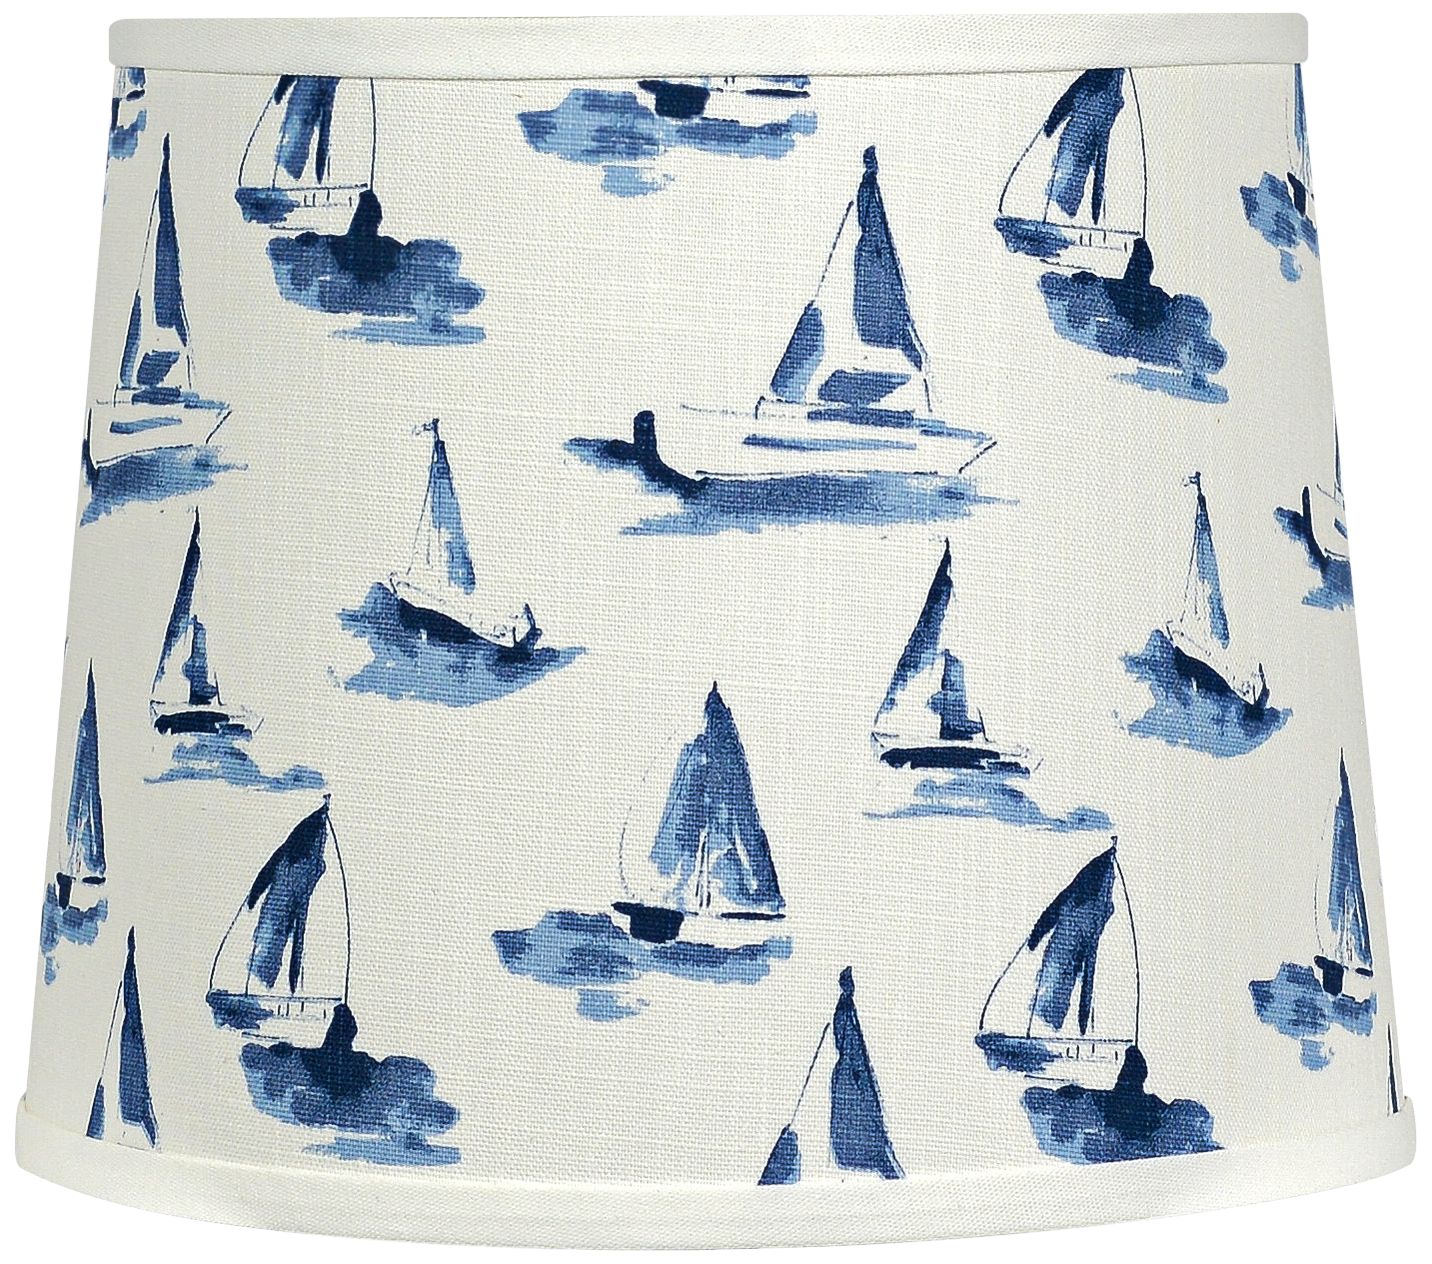 Sea View Sky Blue - White Drum Lamp Shade 14x14x11 (Spider)